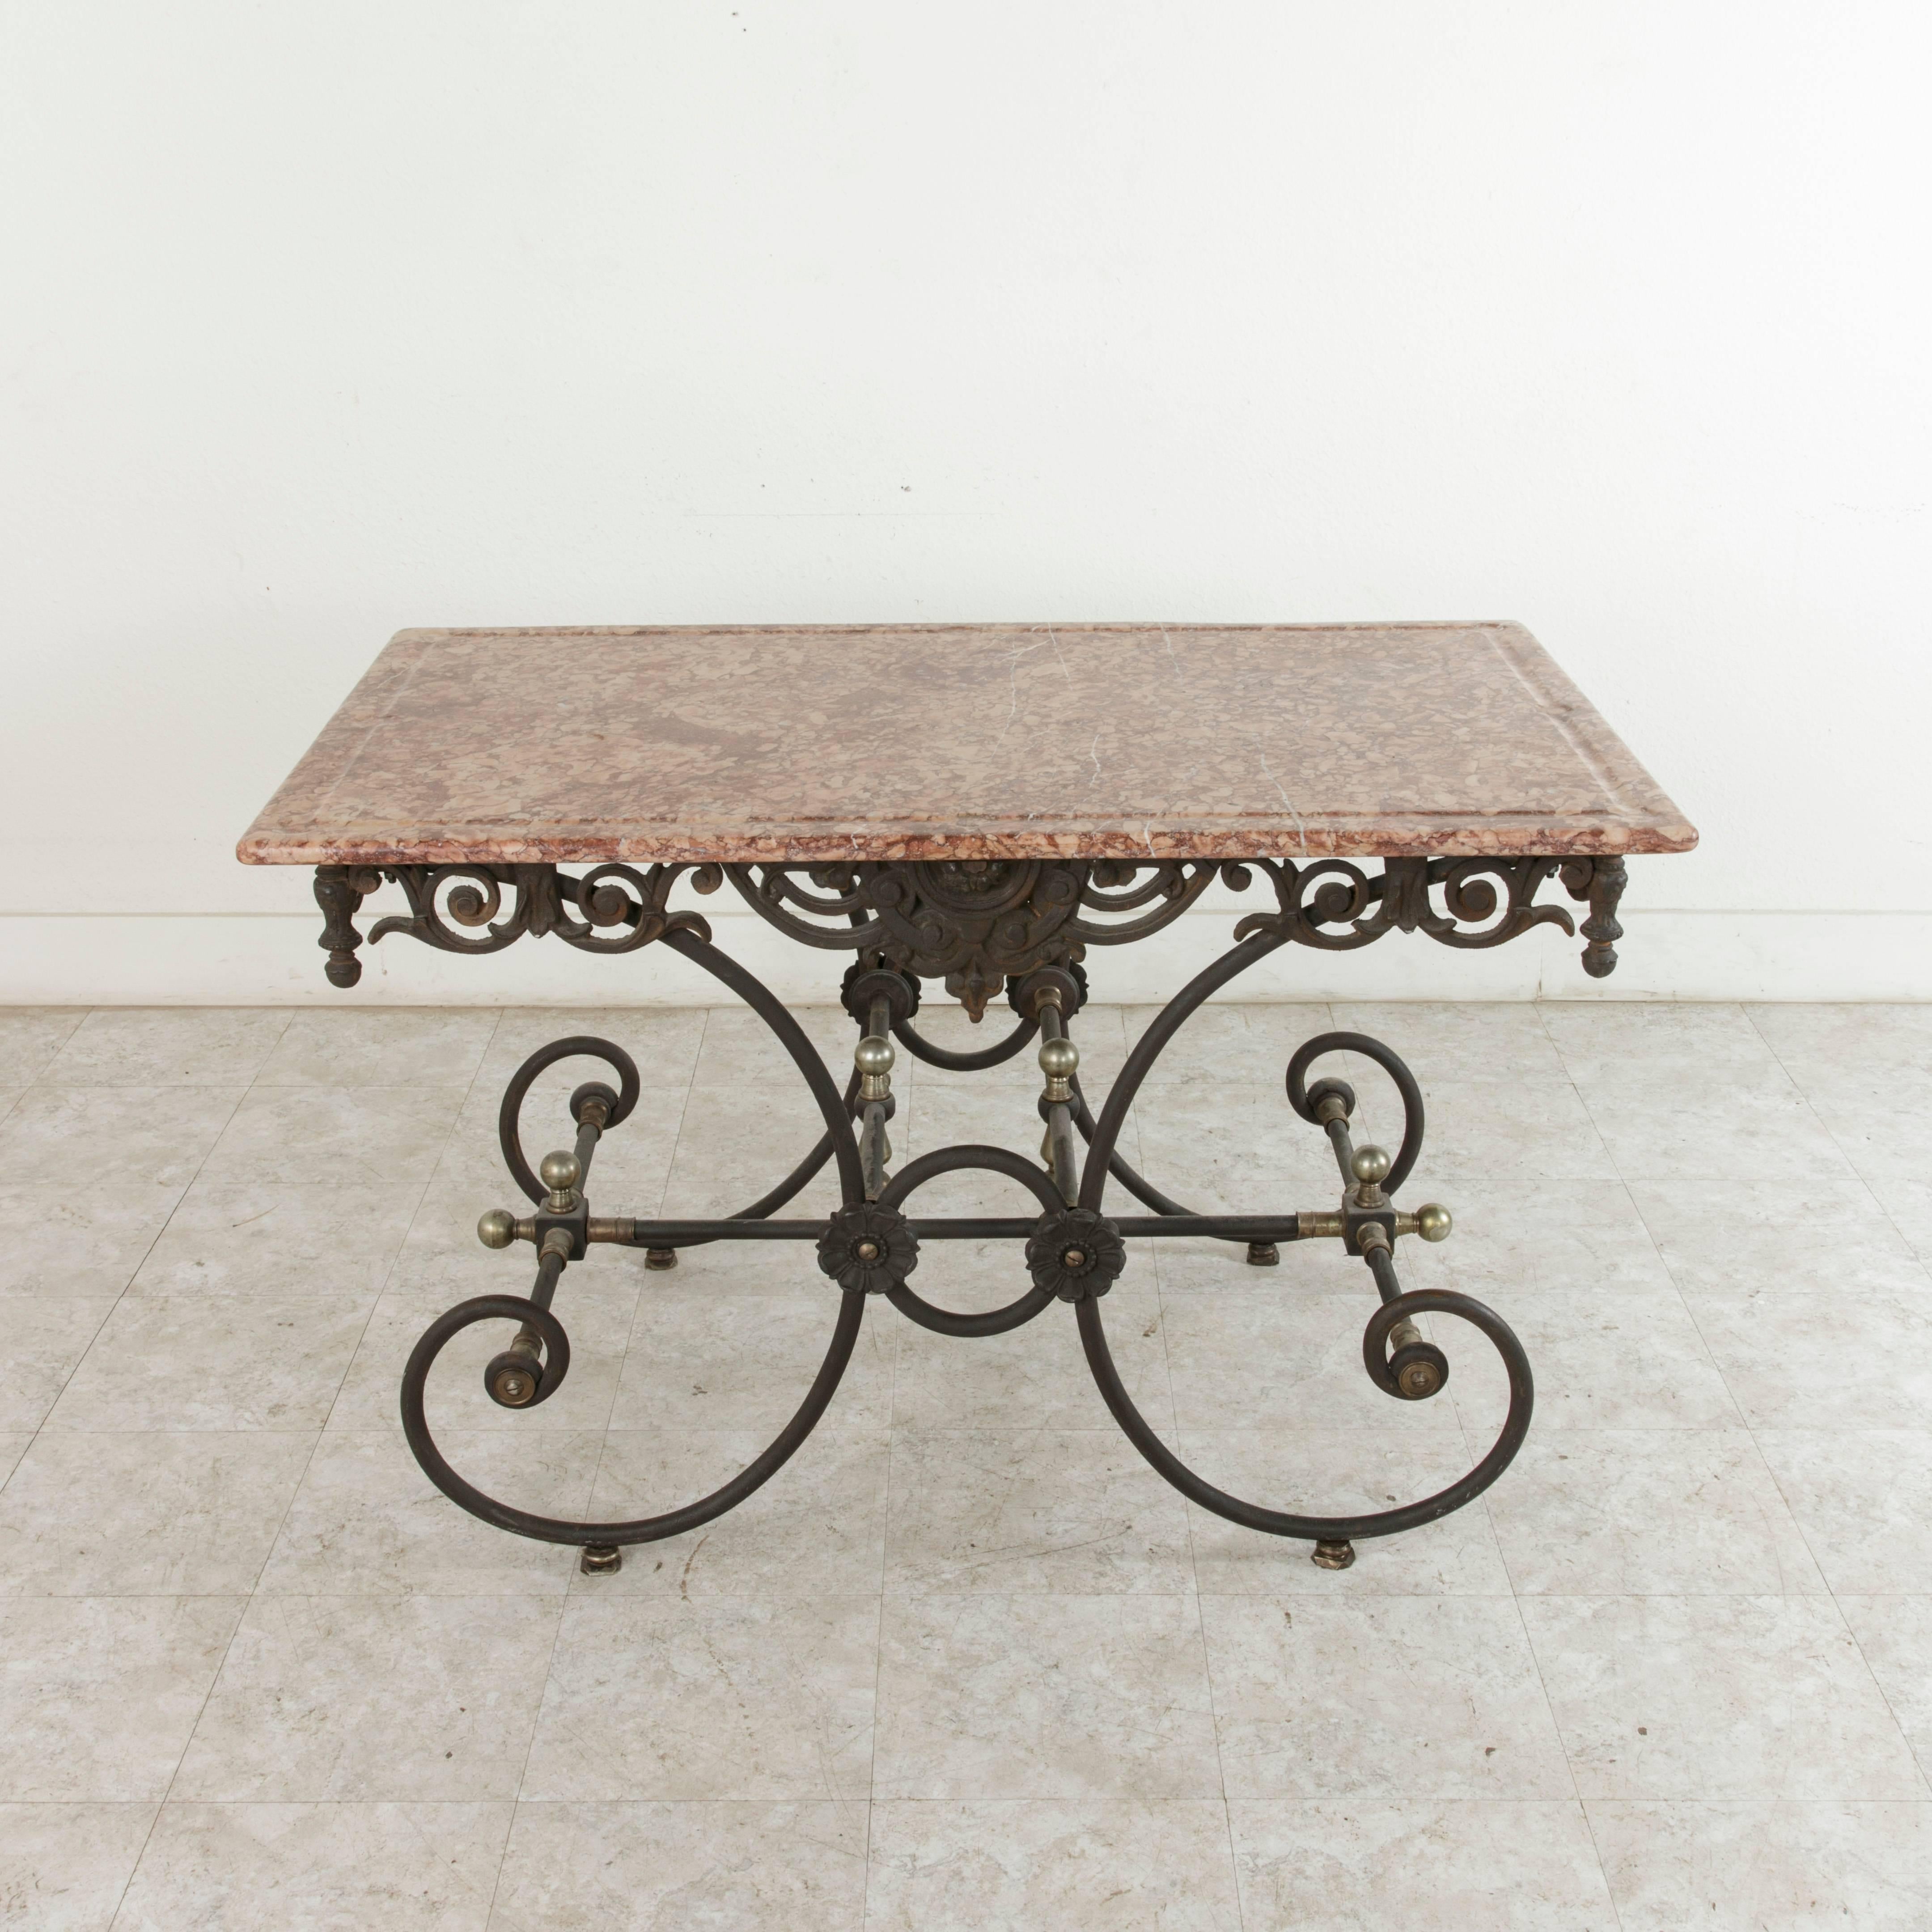 This 20th century French iron pastry table or butcher's table features a solid rose-colored marble top with a groove around the perimeter which was intended to catch blood when the butcher was at work. An intricately scrolled apron supports the